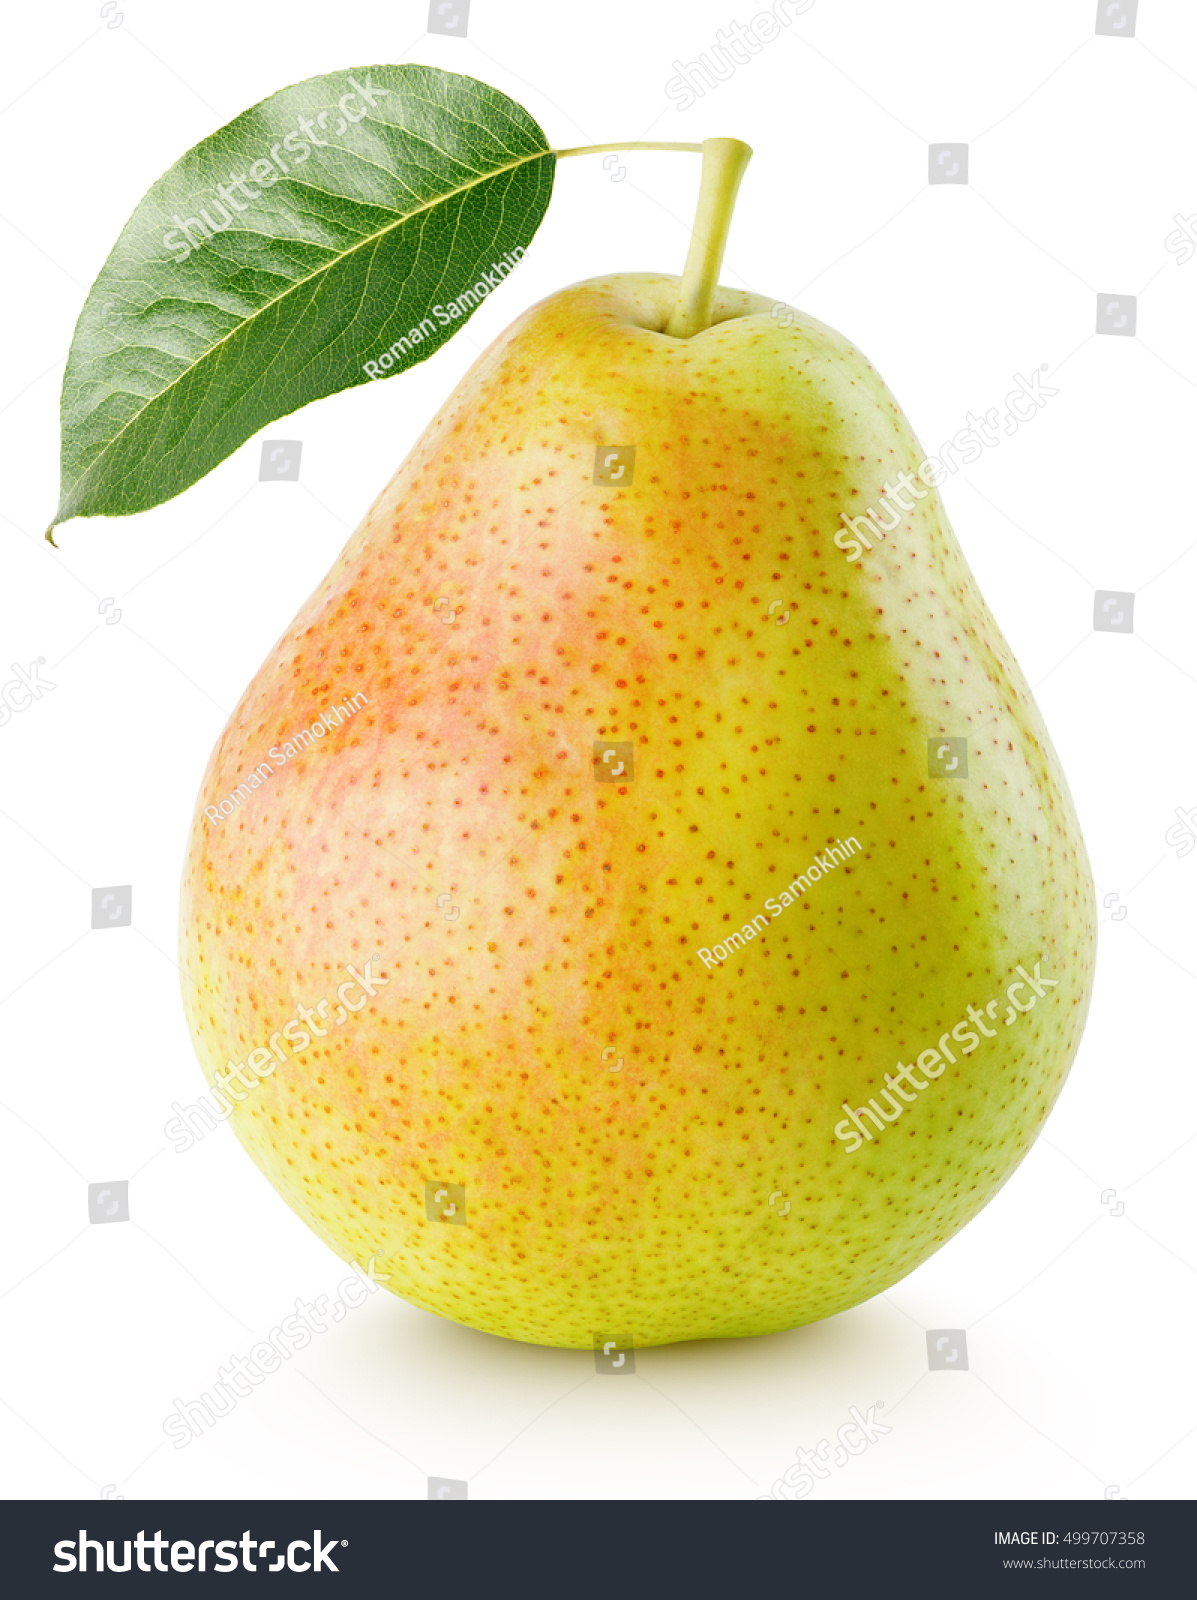 Red yellow pear fruit with leaf isolated on white with clipping path #499707358